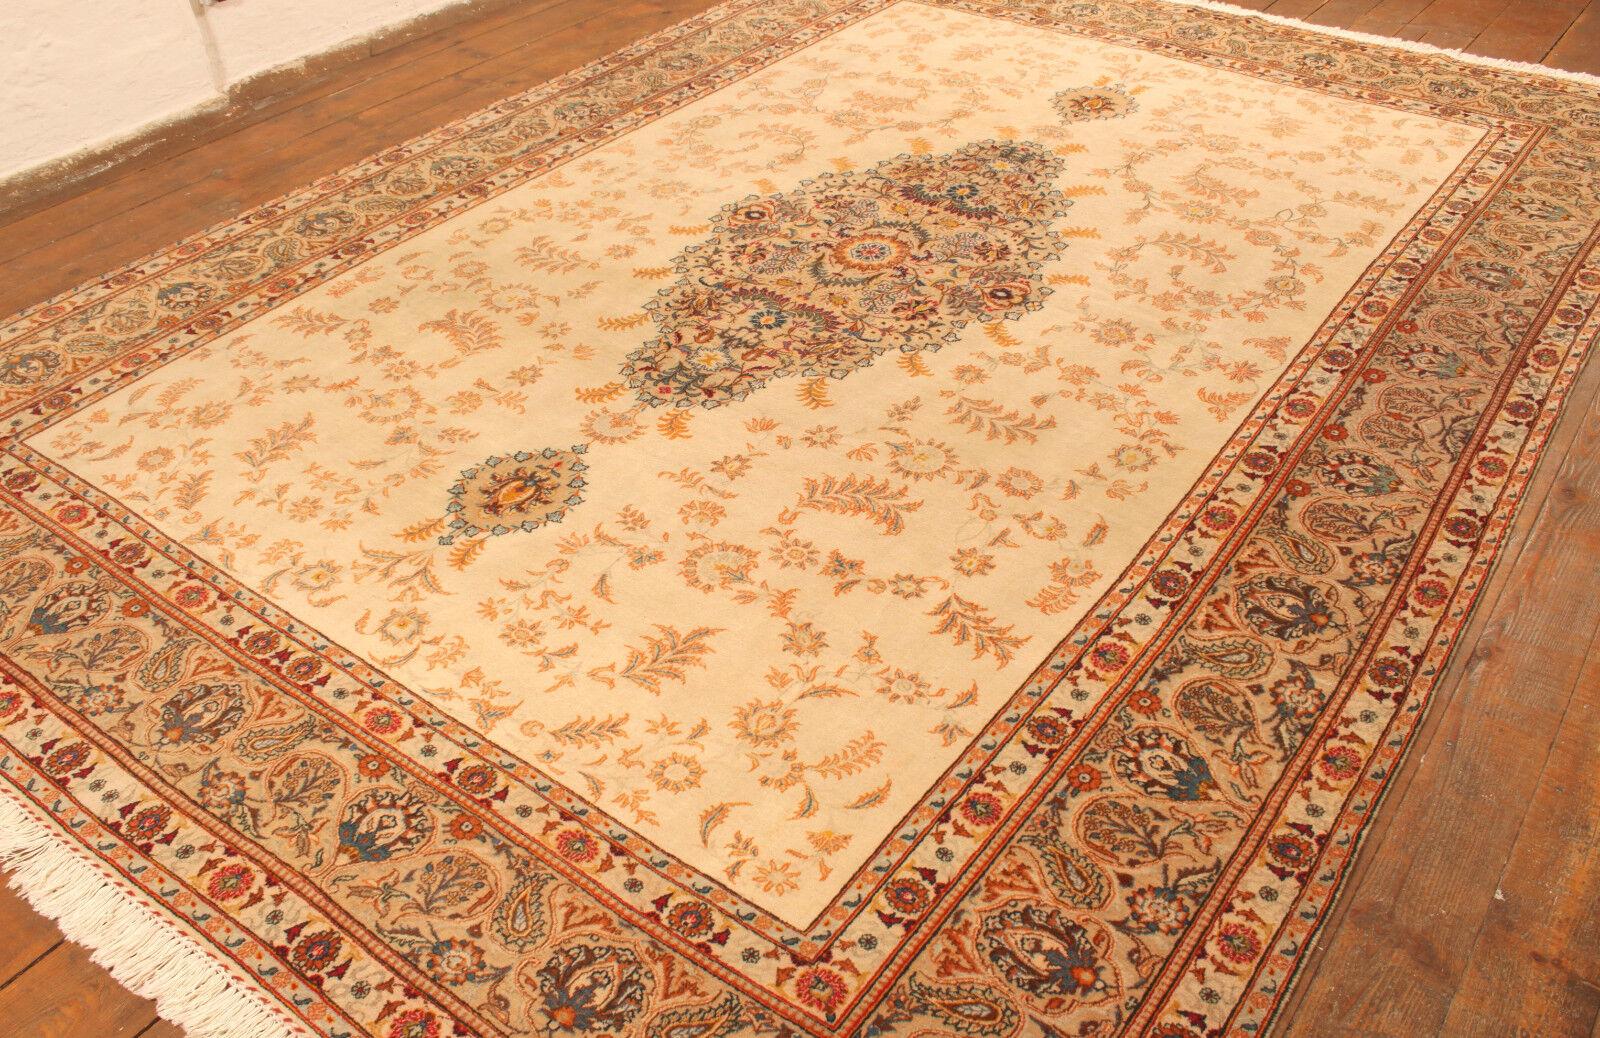 Handmade Contemporary Persian Style Tabriz Rug 8.9' x 12.8', 2000s - 1T05 In Good Condition For Sale In Bordeaux, FR